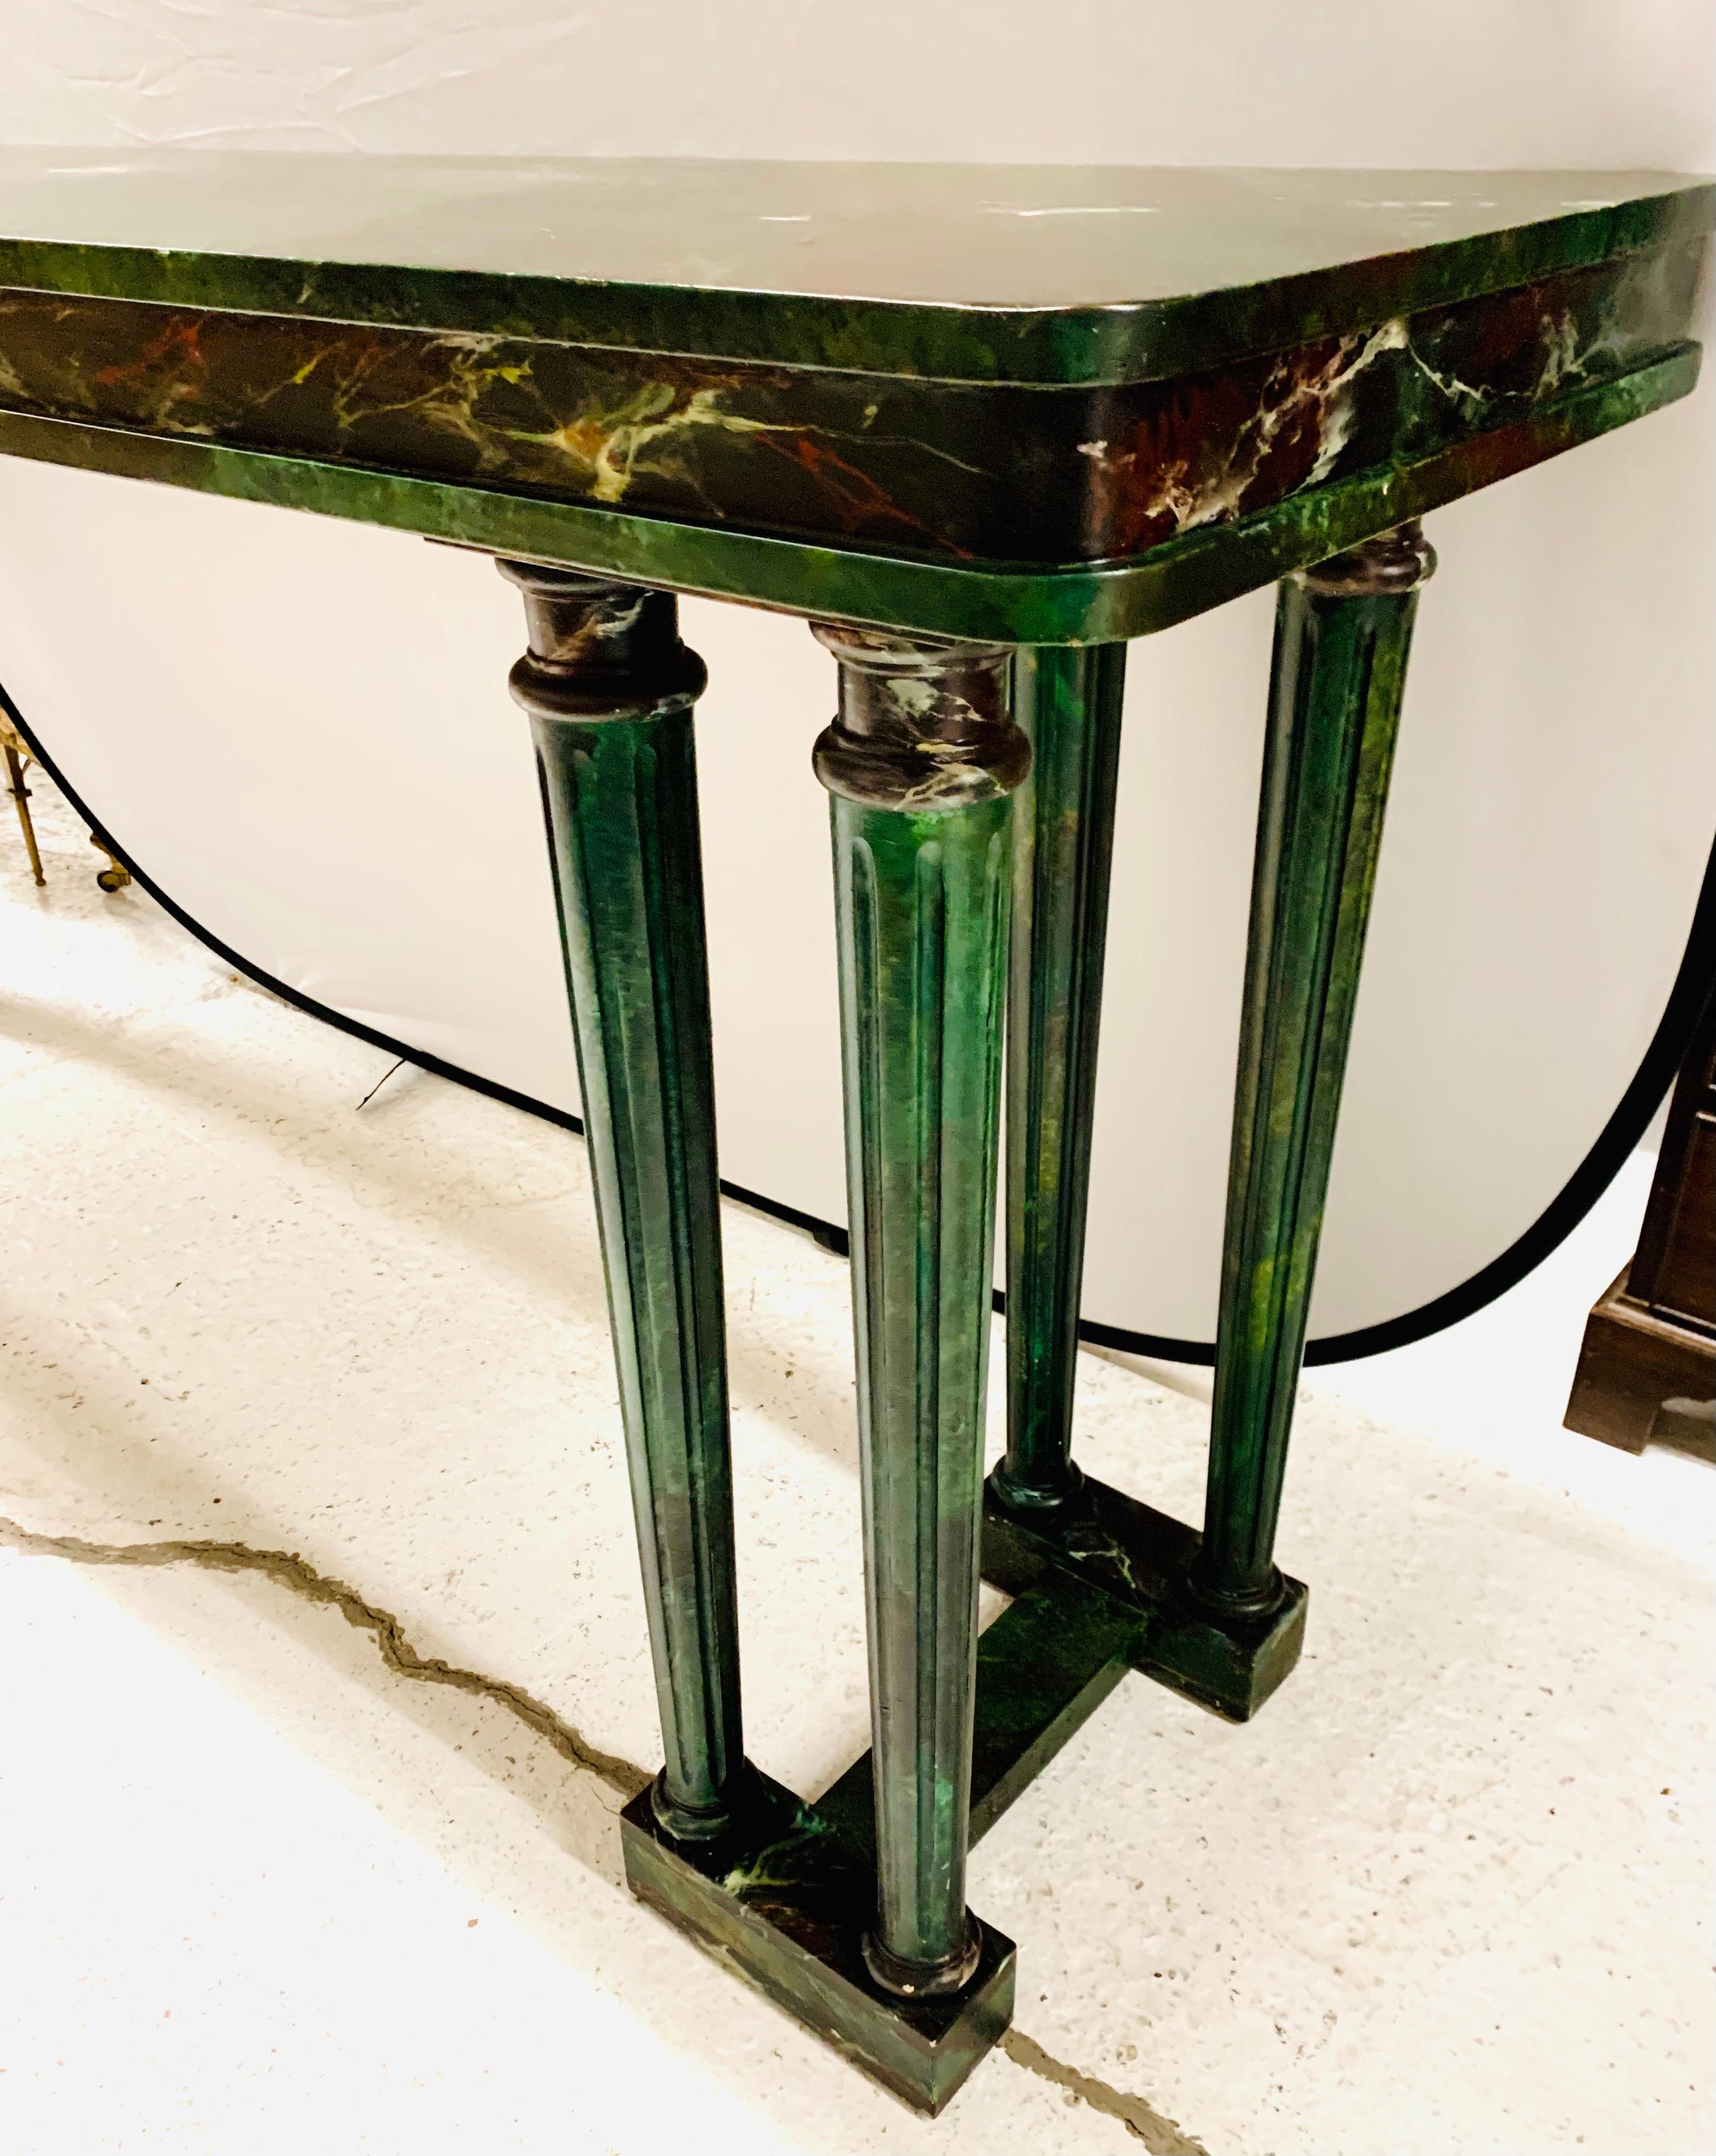 Neoclassical style console table has been hand painted in a faux green marble finish. It rests on eight painted column supports.